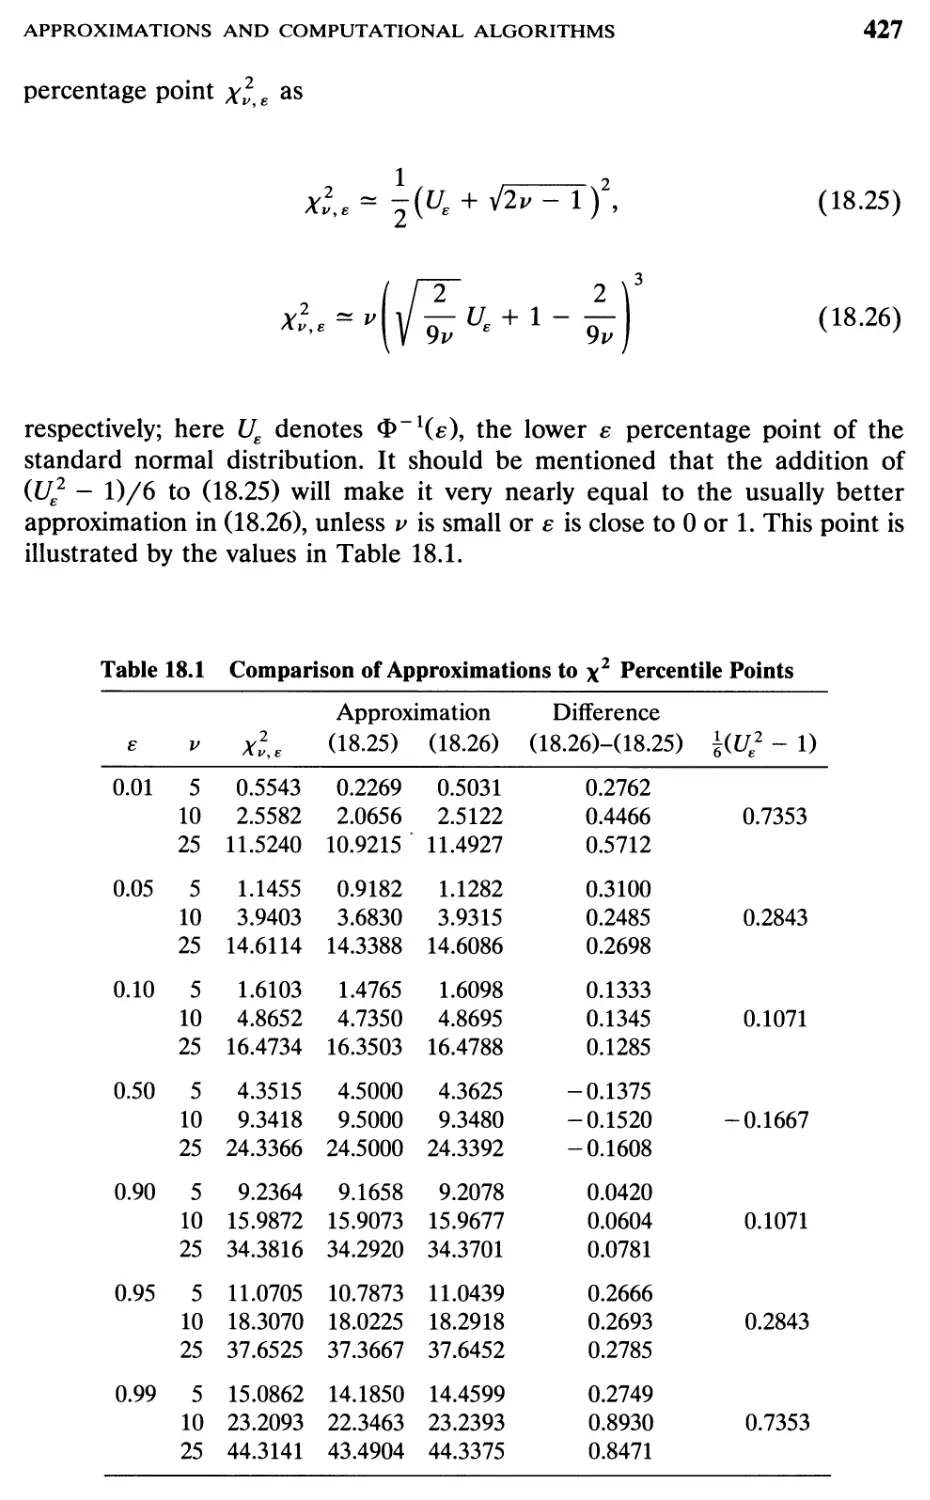 TABLE 18.1 Comparison of approximations to x2 percentile points 427